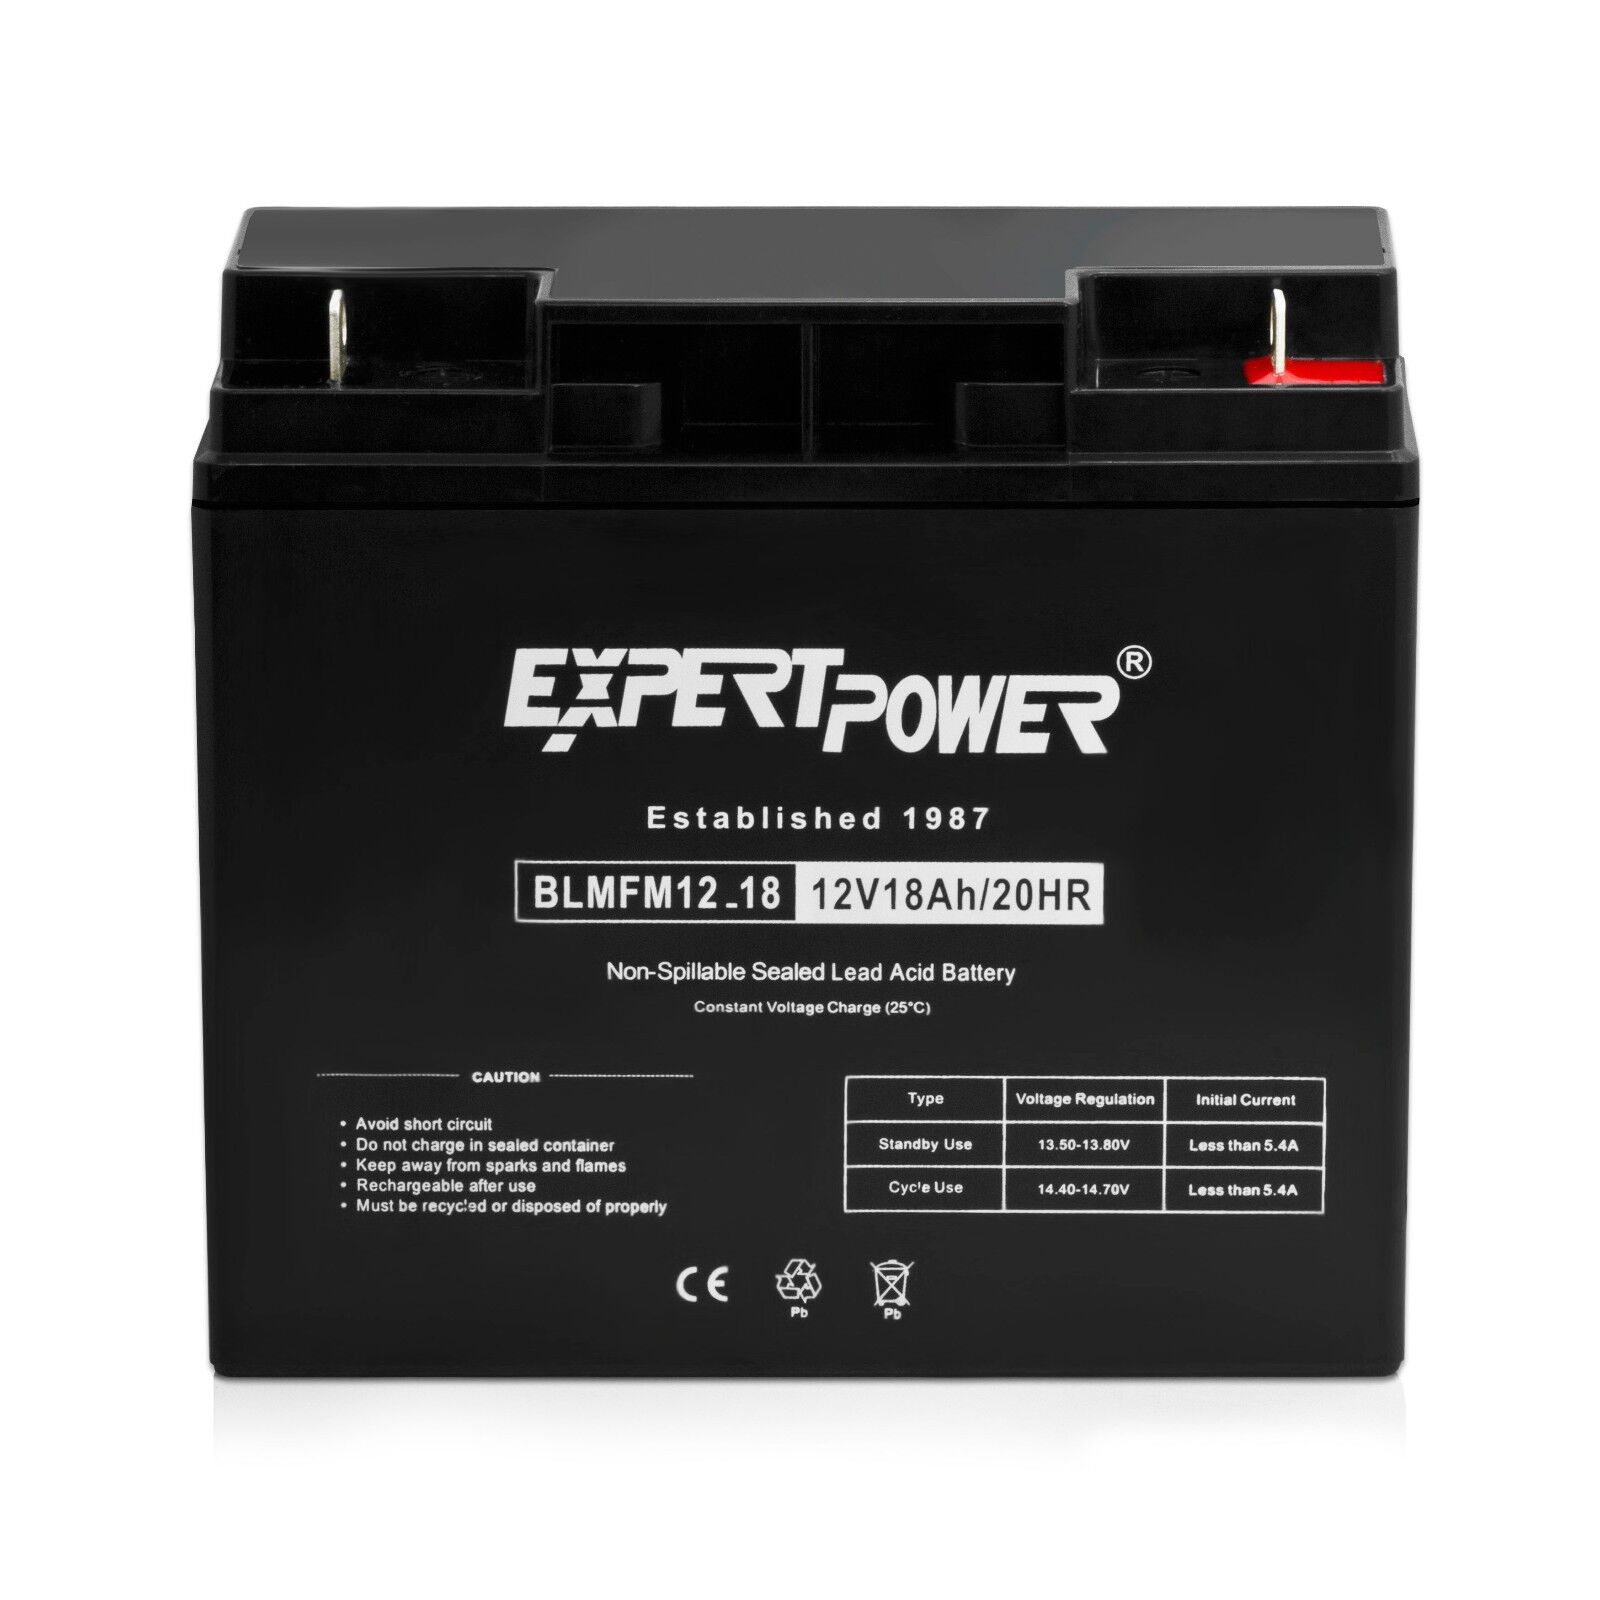 2 EXP12180 12V 18AH Battery for APC SmartUps 1400 1500 [Replacement for UB12180] ExpertPower EXP12180 - фотография #6